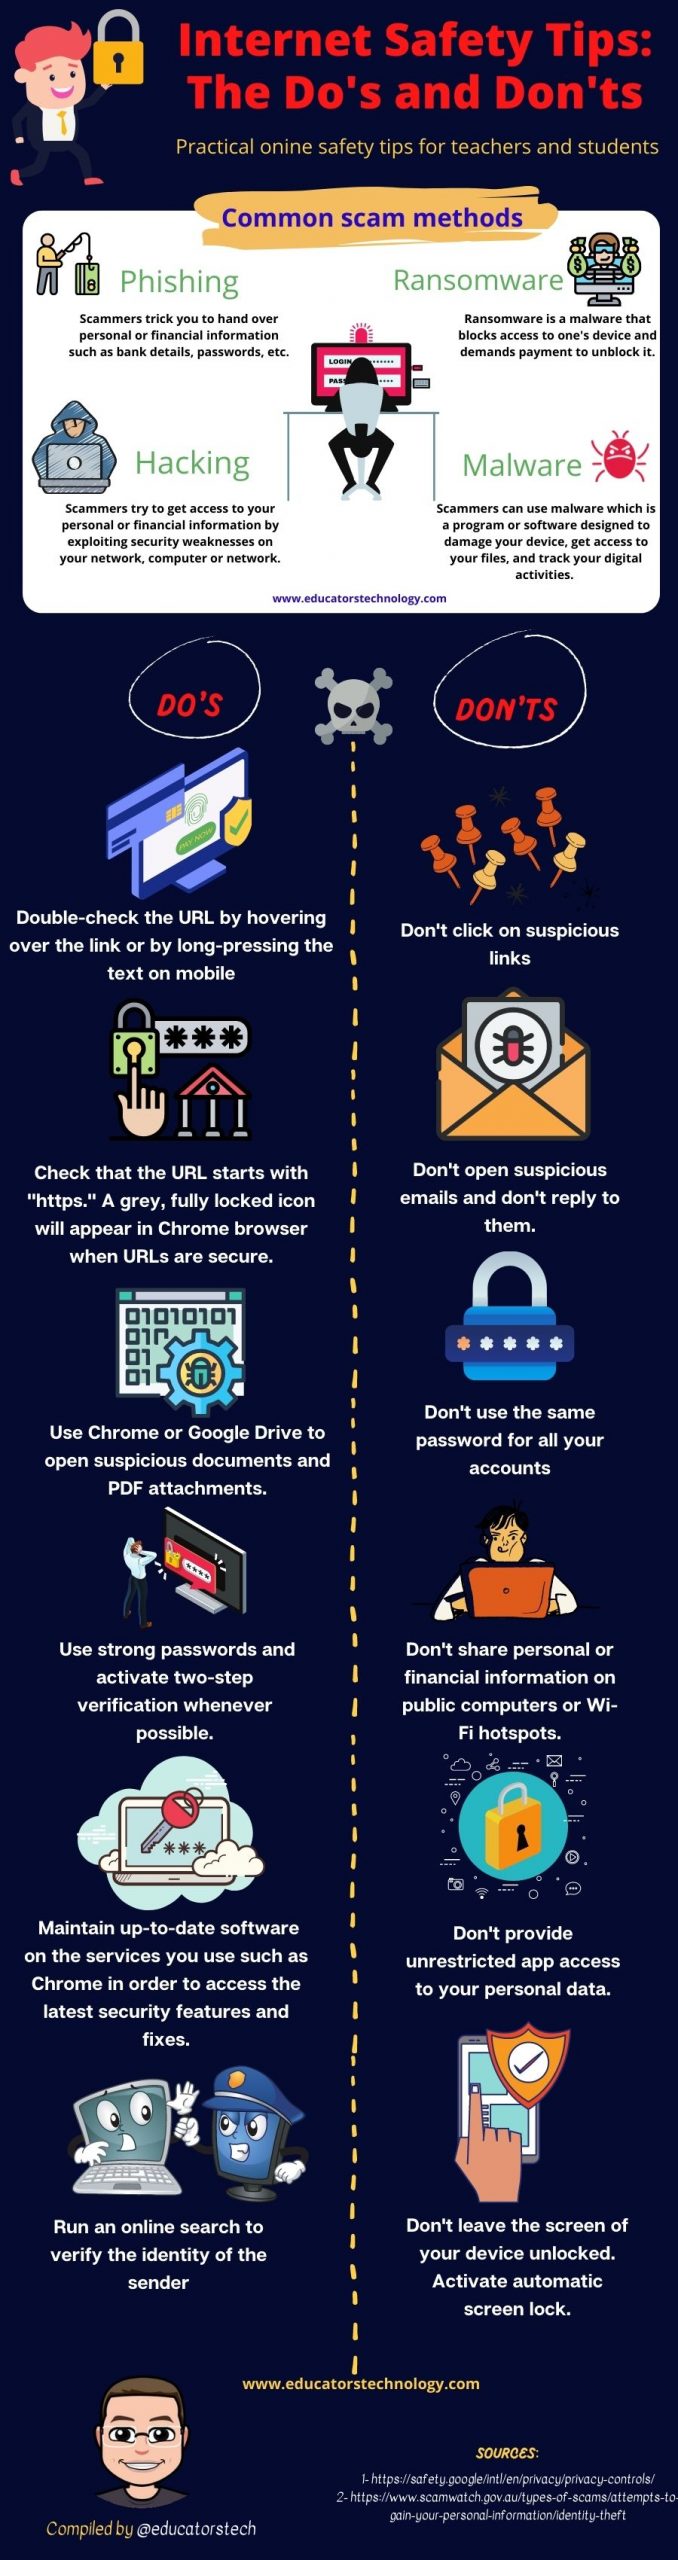 Internet Safety Do's and Don'ts